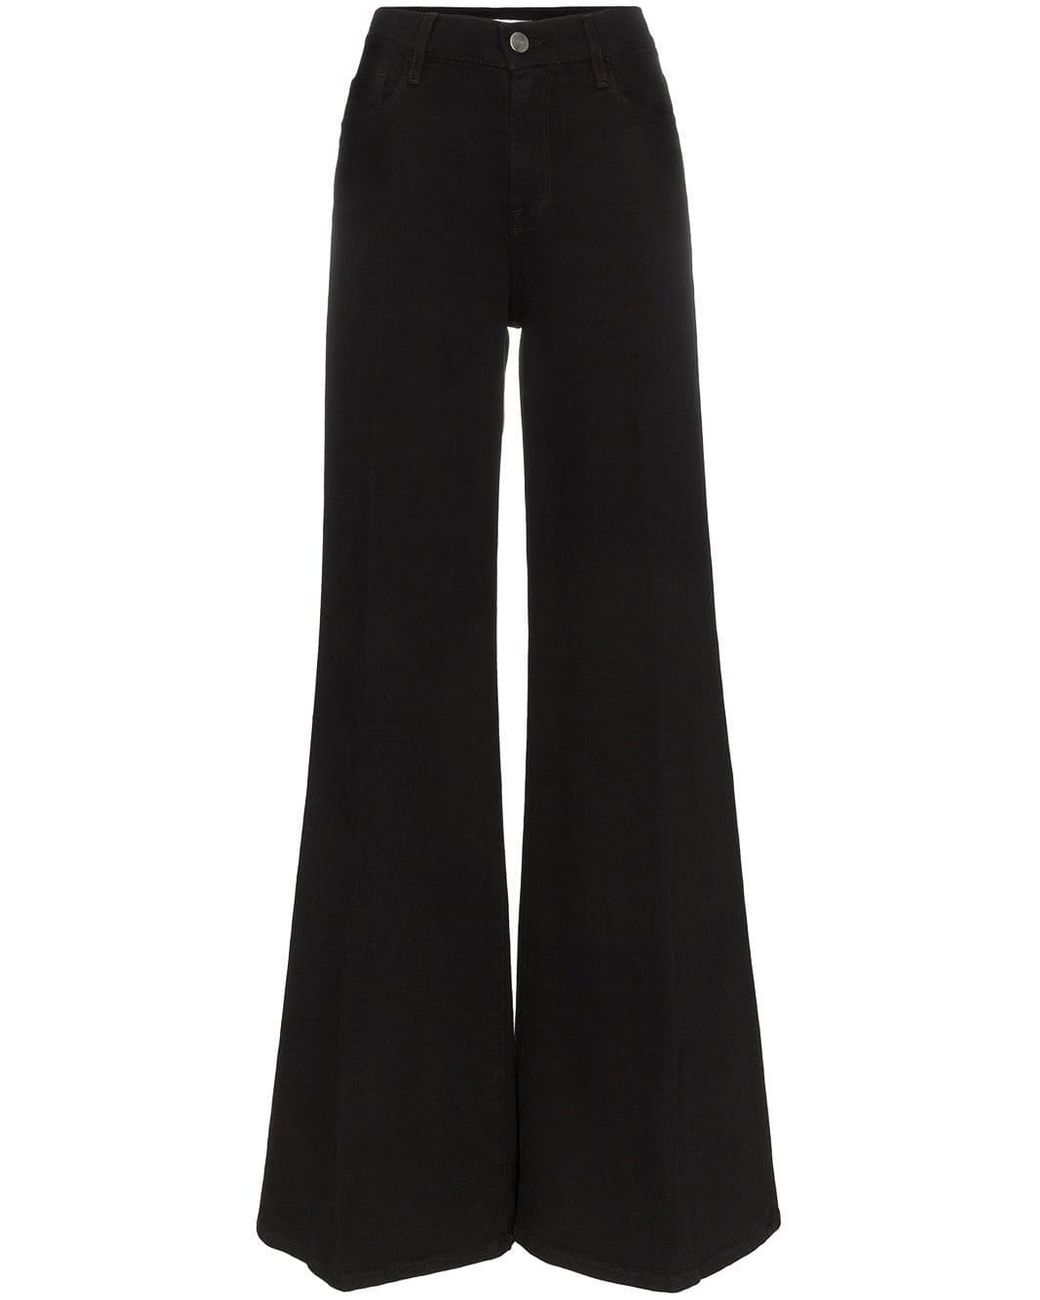 FRAME Denim Le Palazzo Wide-leg Jeans in Black - Save 9% - Lyst